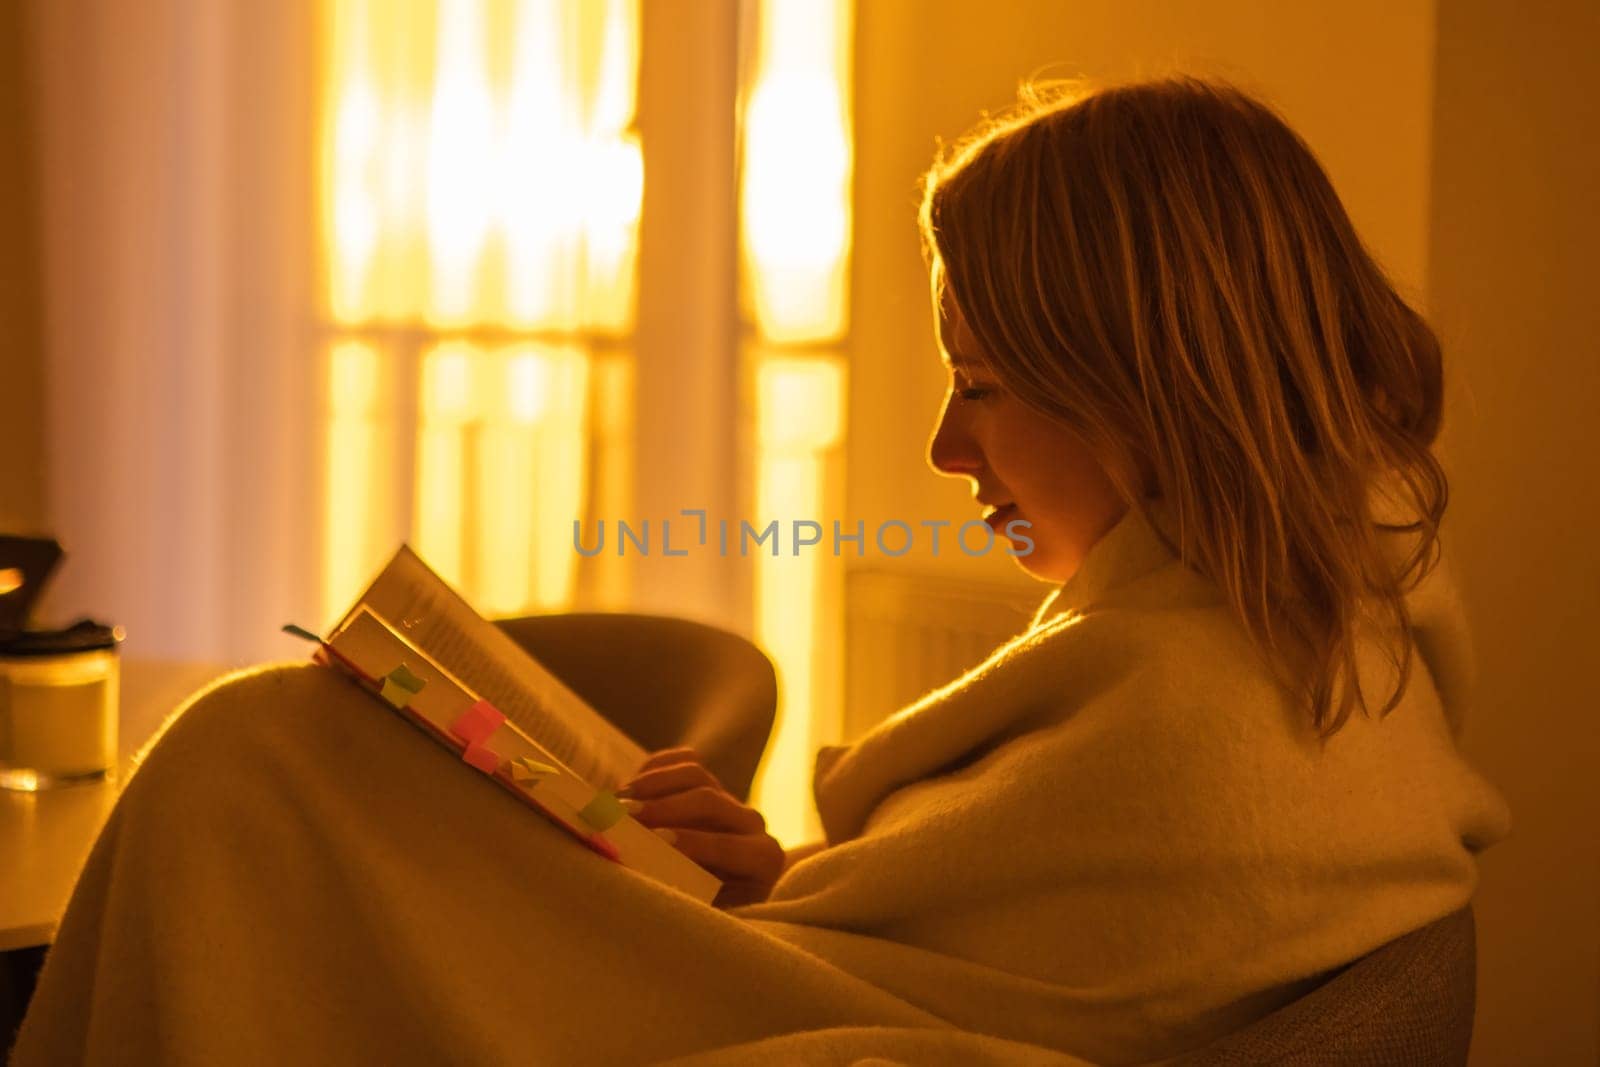 Smiling young beautiful woman reading a book, wrapped in a blanket while sitting in the living room at sunset light.